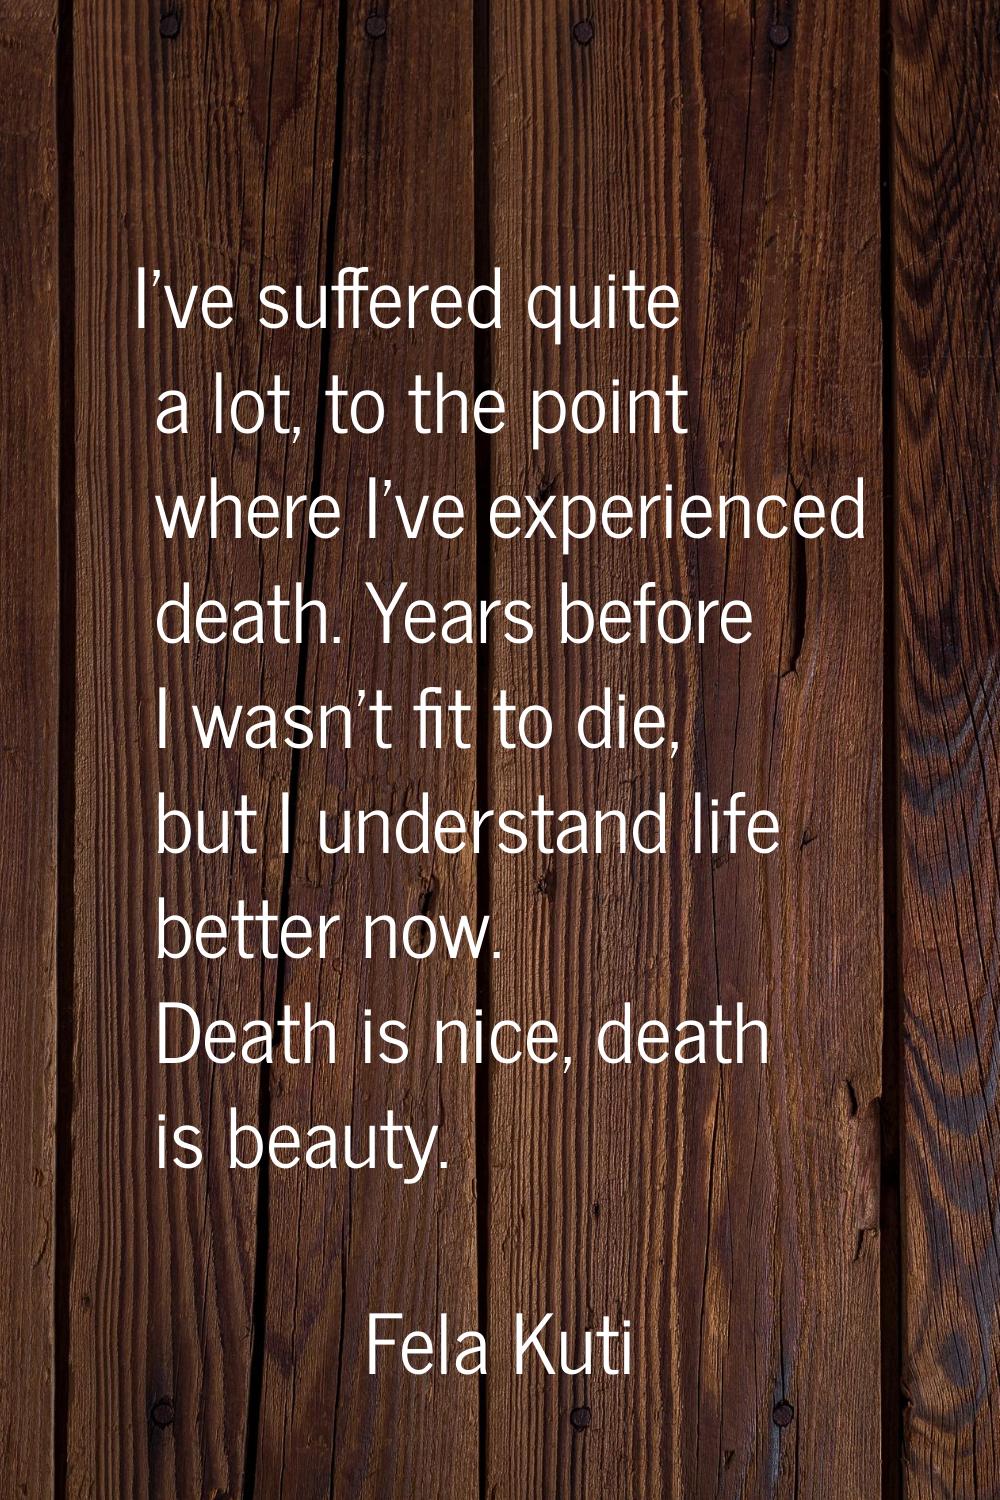 I've suffered quite a lot, to the point where I've experienced death. Years before I wasn't fit to 